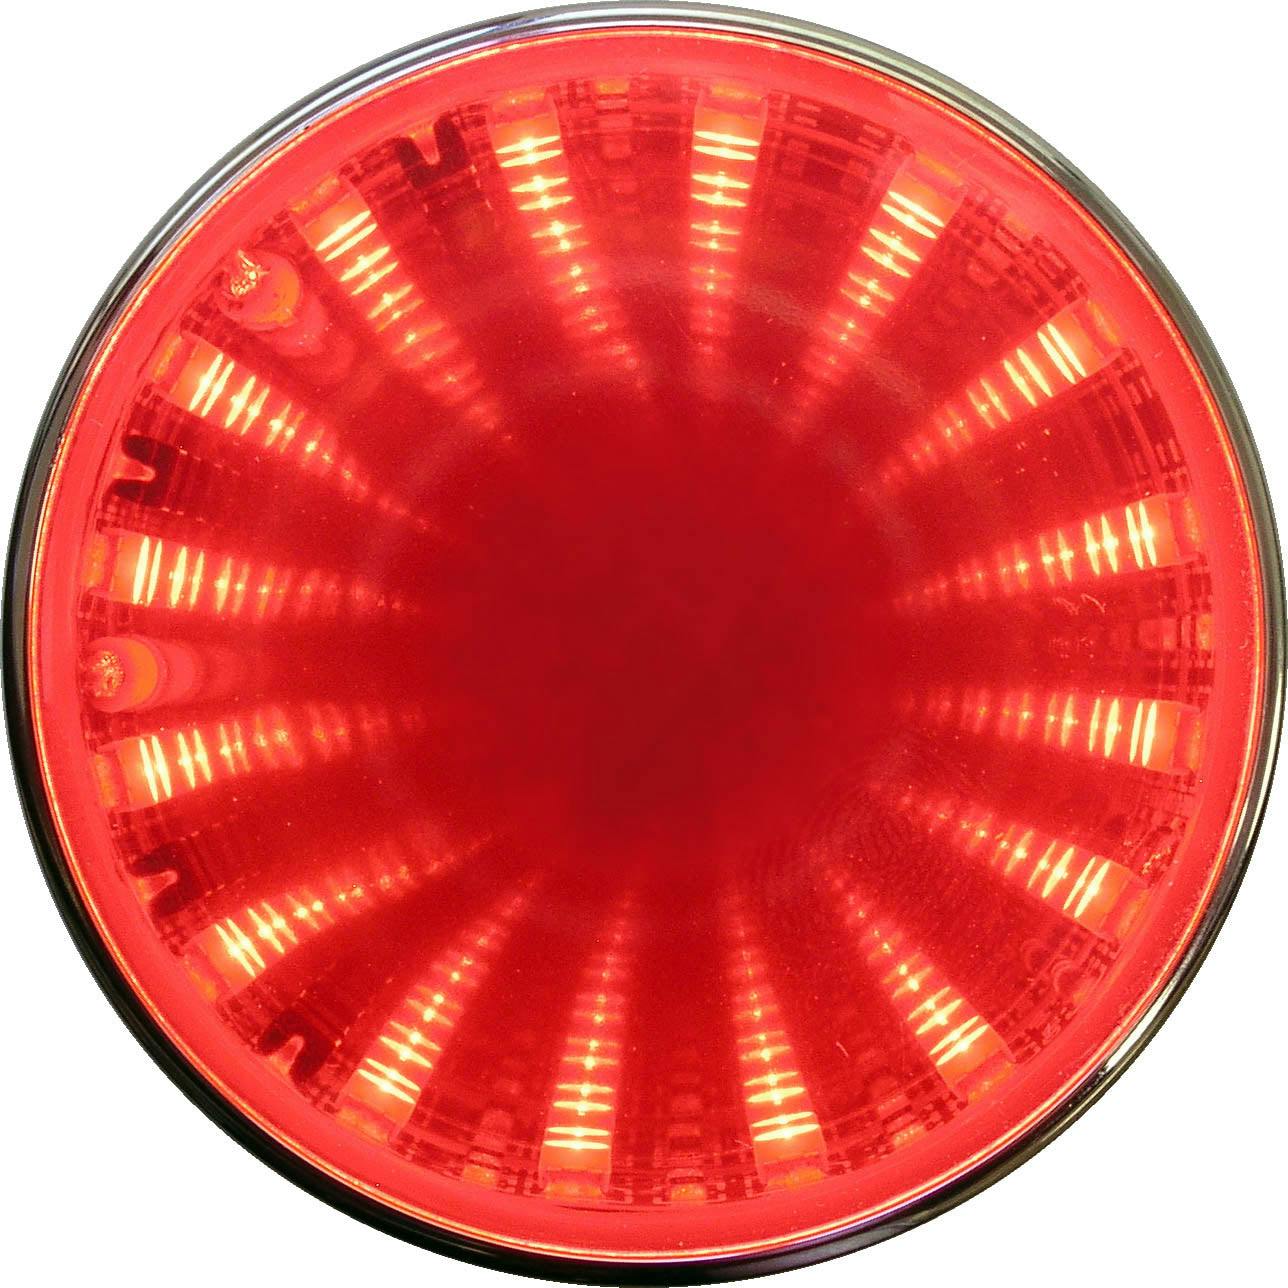 LED Auxiliary Tunnel Light, Round, 2", red, bulk pack (Pack of 50)